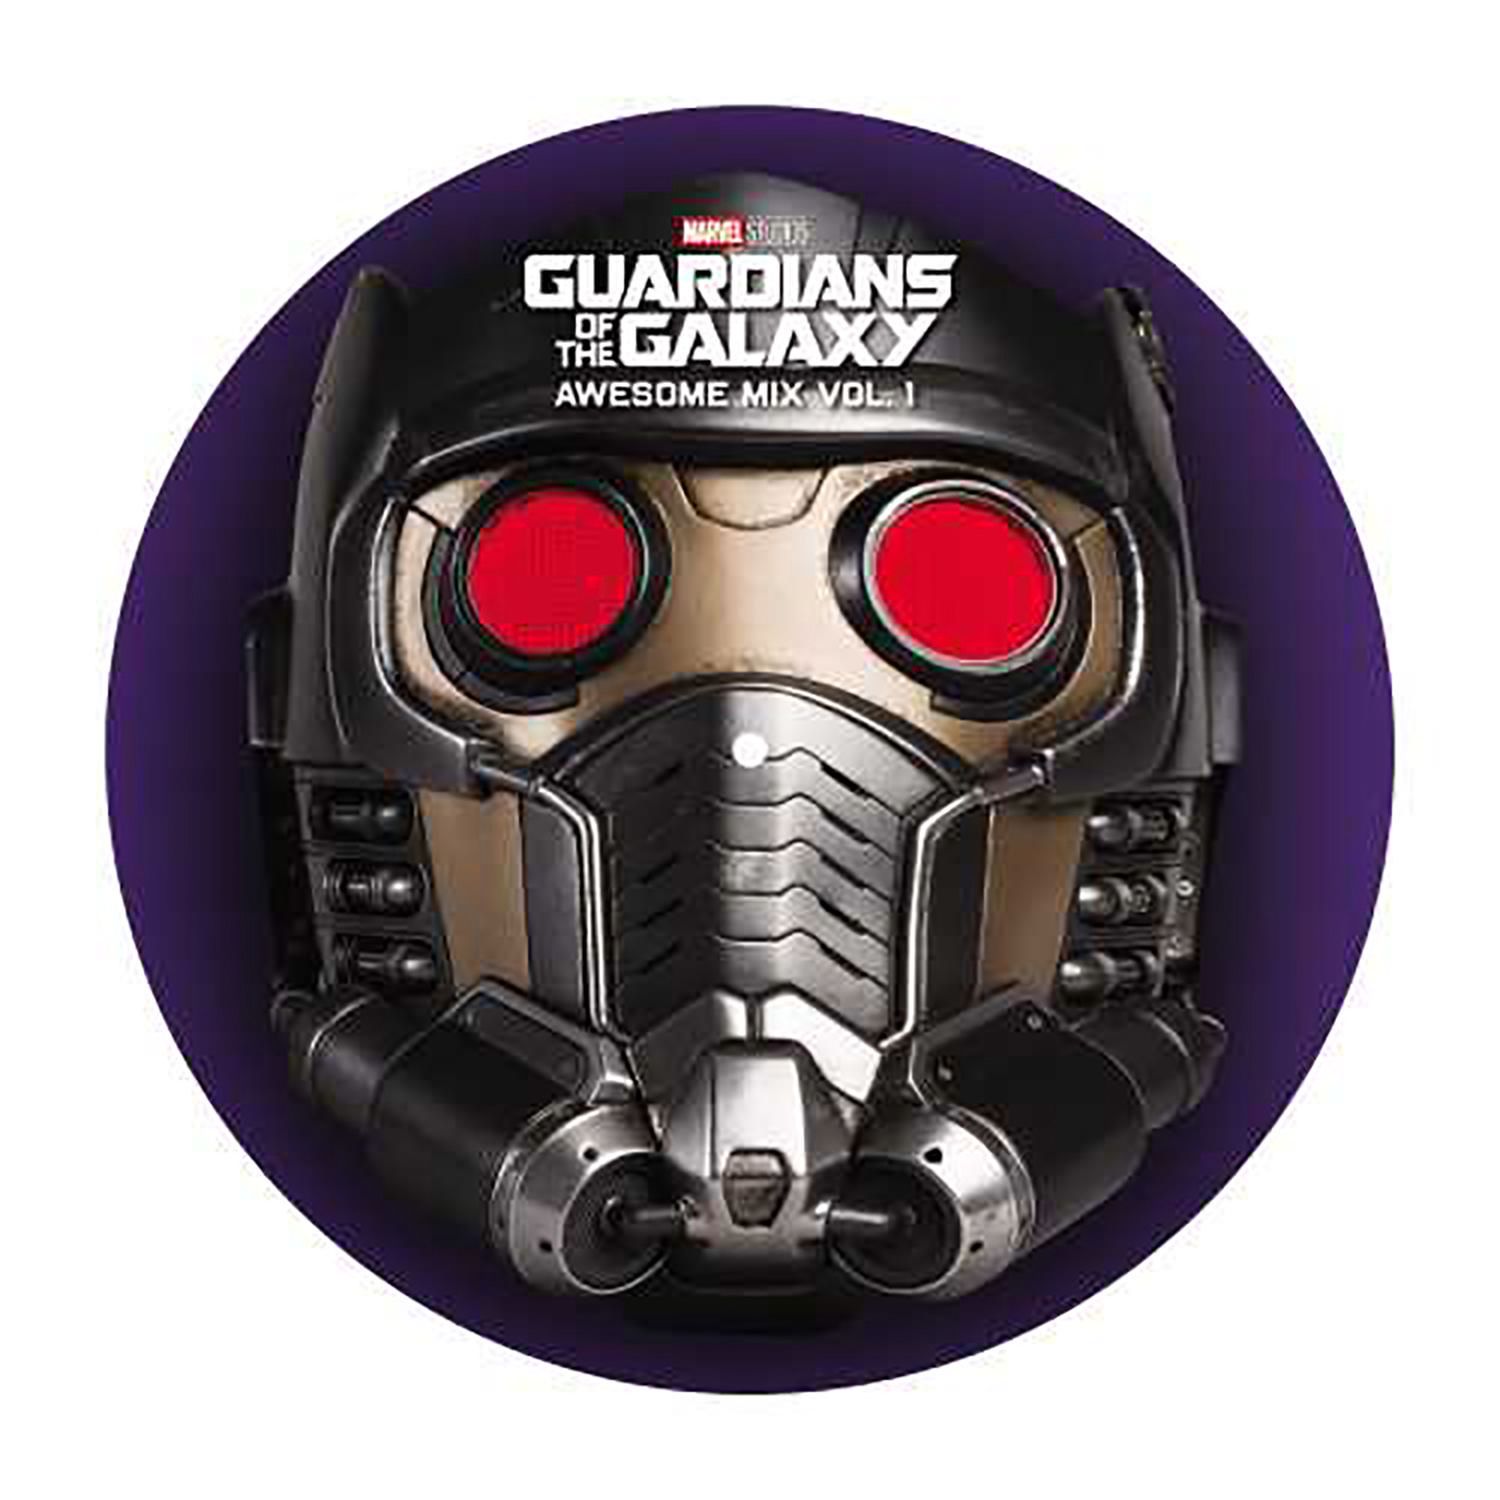 guardians of the galaxy soundtrack download mp3 zip